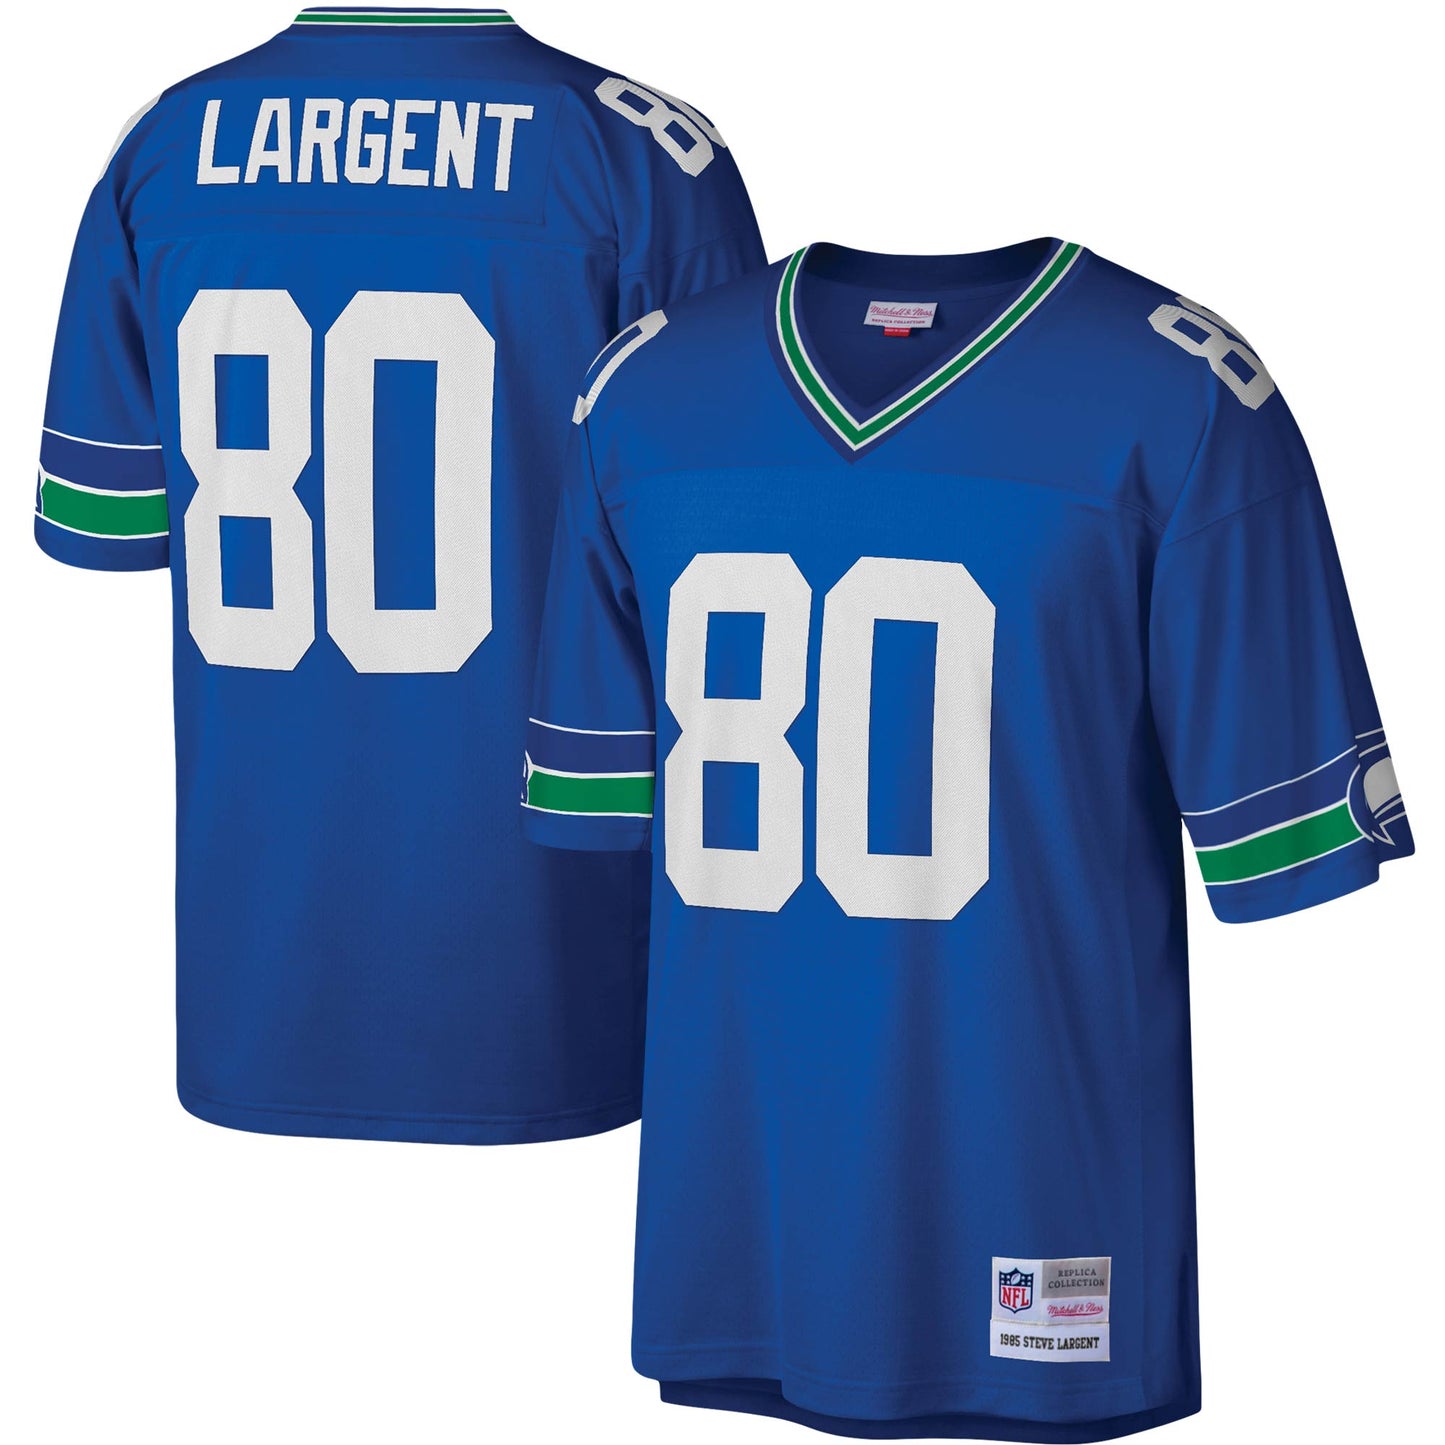 Steve Largent Seattle Seahawks Mitchell & Ness Legacy Replica Jersey - Royal